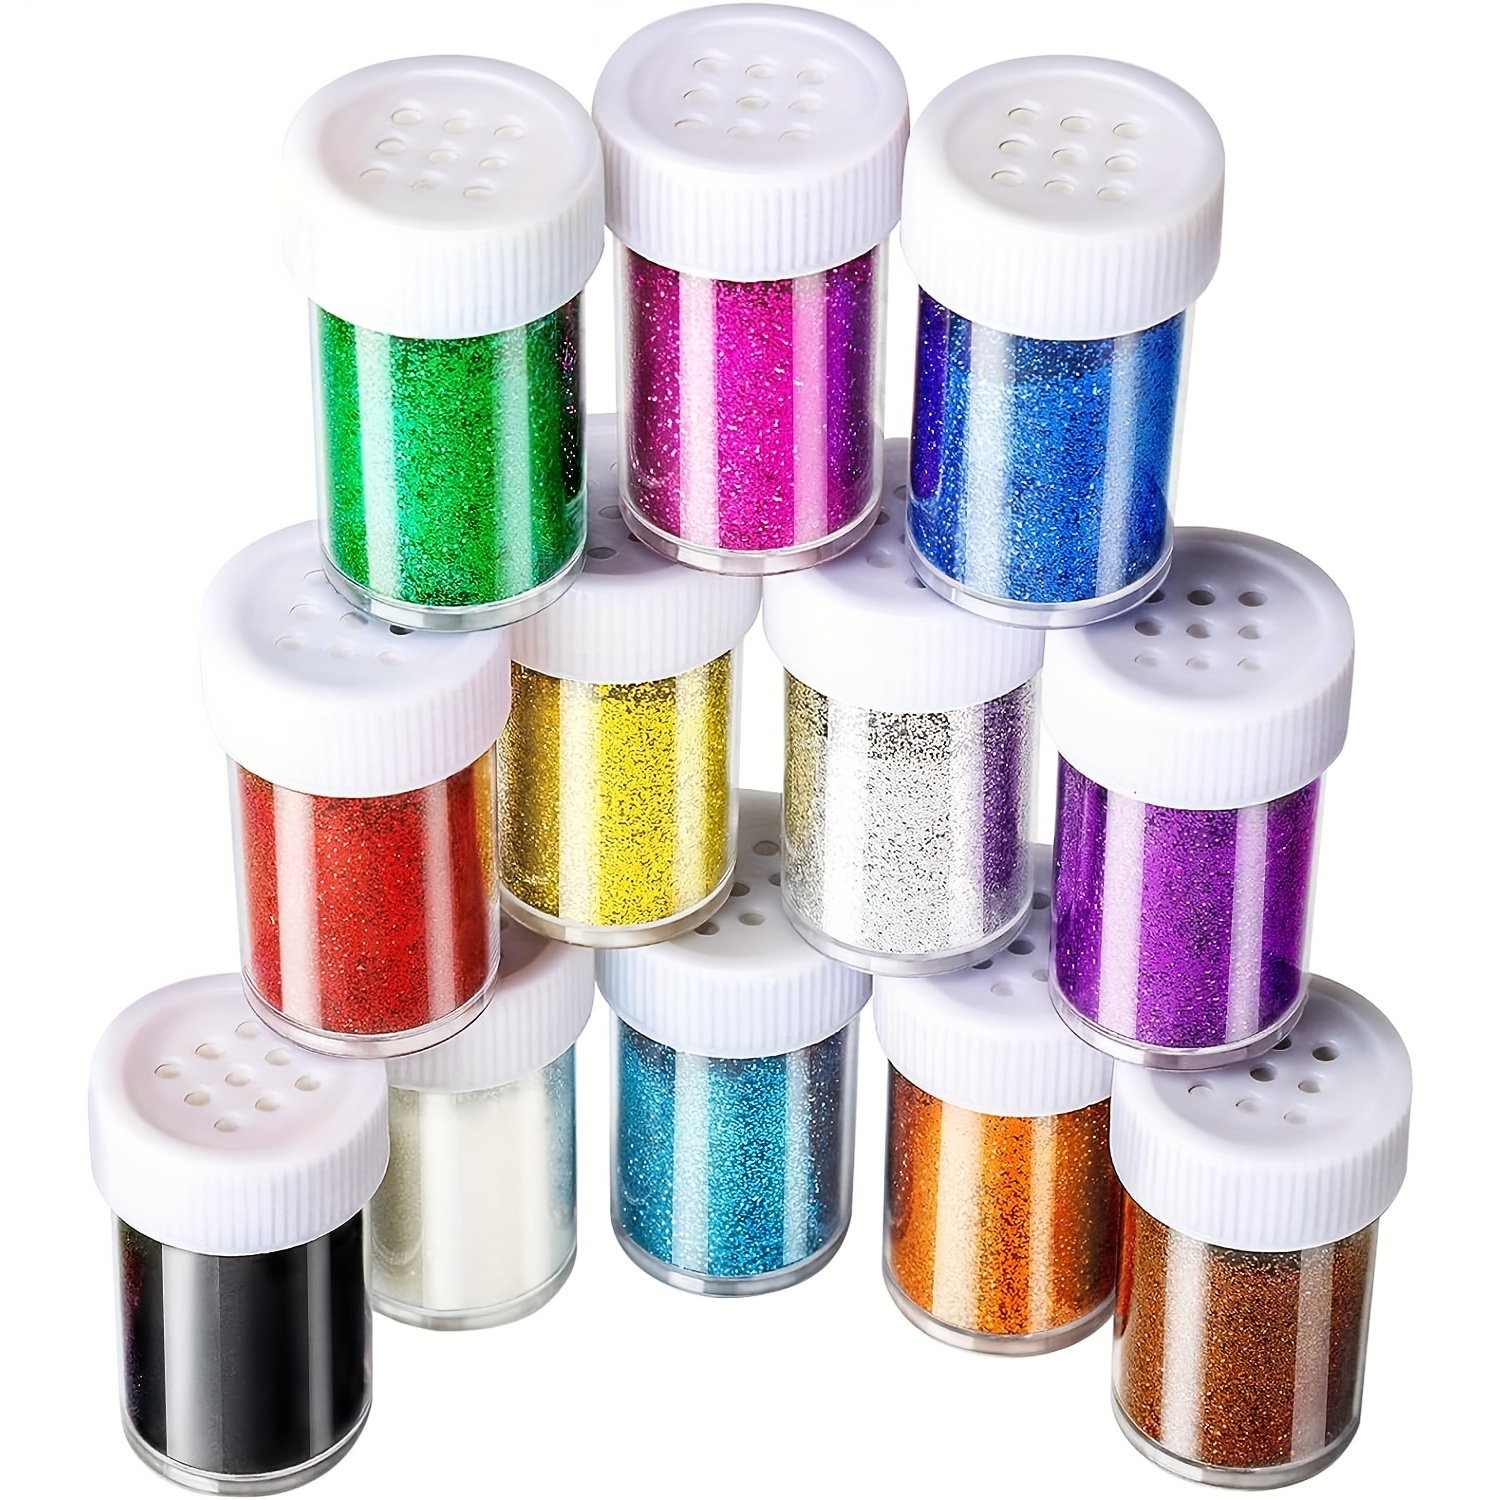 1Box 8.47oz Large Sequins For Crafts 8 Colors Flat Round Sequin Paillettes  PVC Loose Sequins And Spangles For Embroidery Applique Knitting Arts Crafts